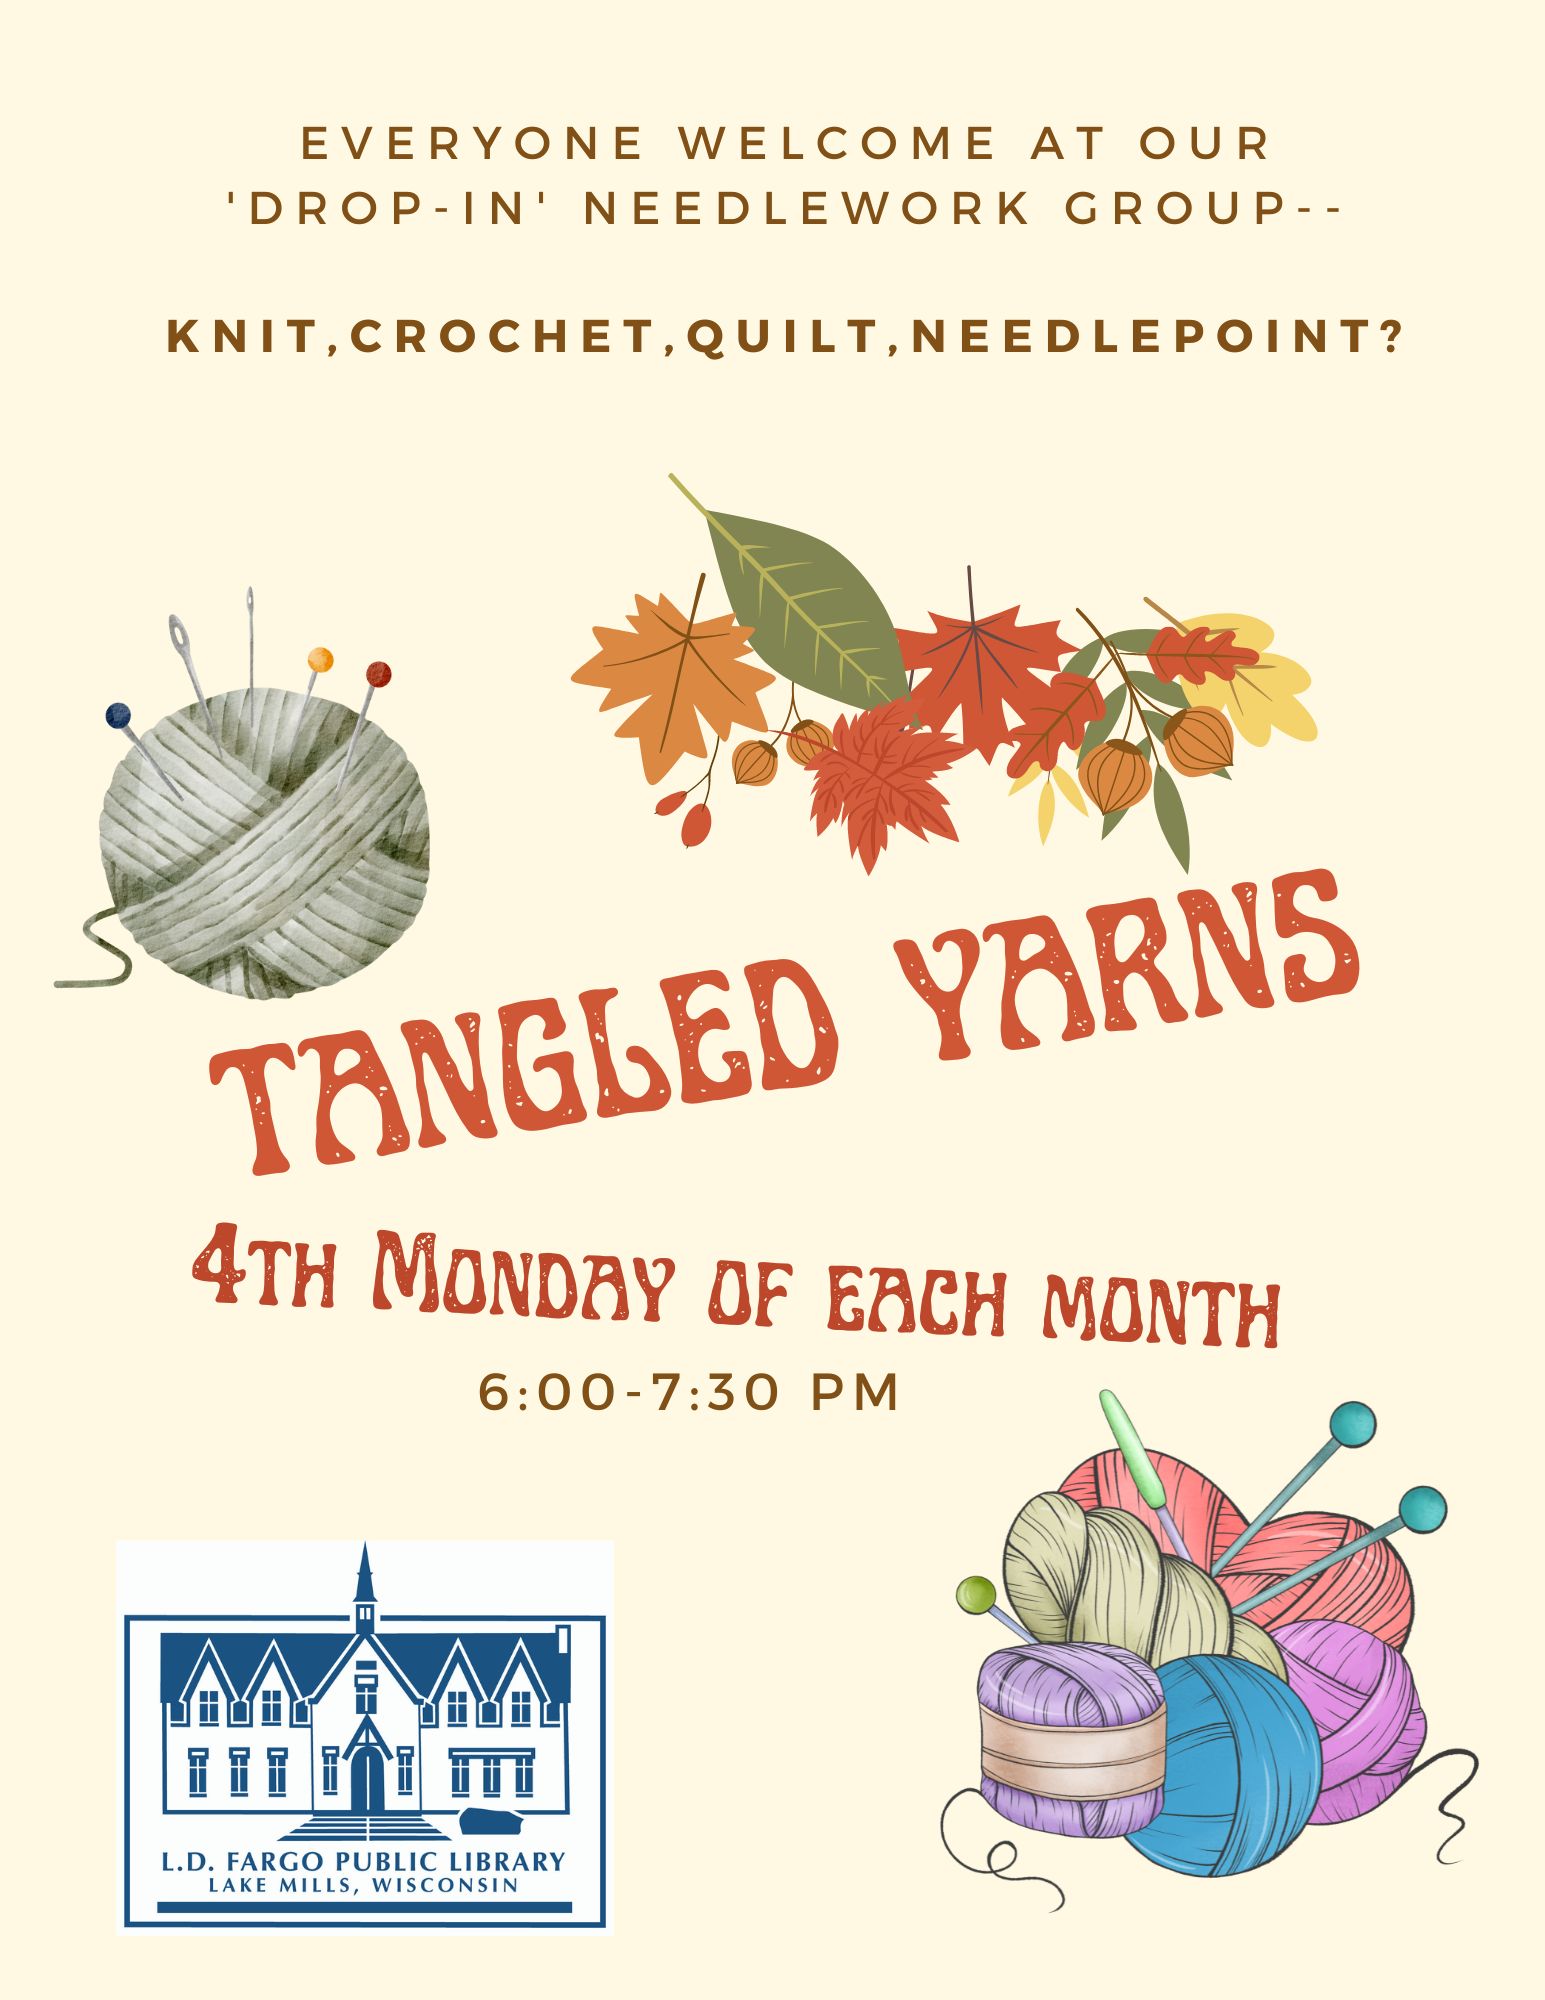 Tangled Yarns.  Meeting Every Fourth Monday in Library Meeting Room 6-7:30pm.  Everyone welcome-- Knit, Crochet, Quilt, Needlepoint...